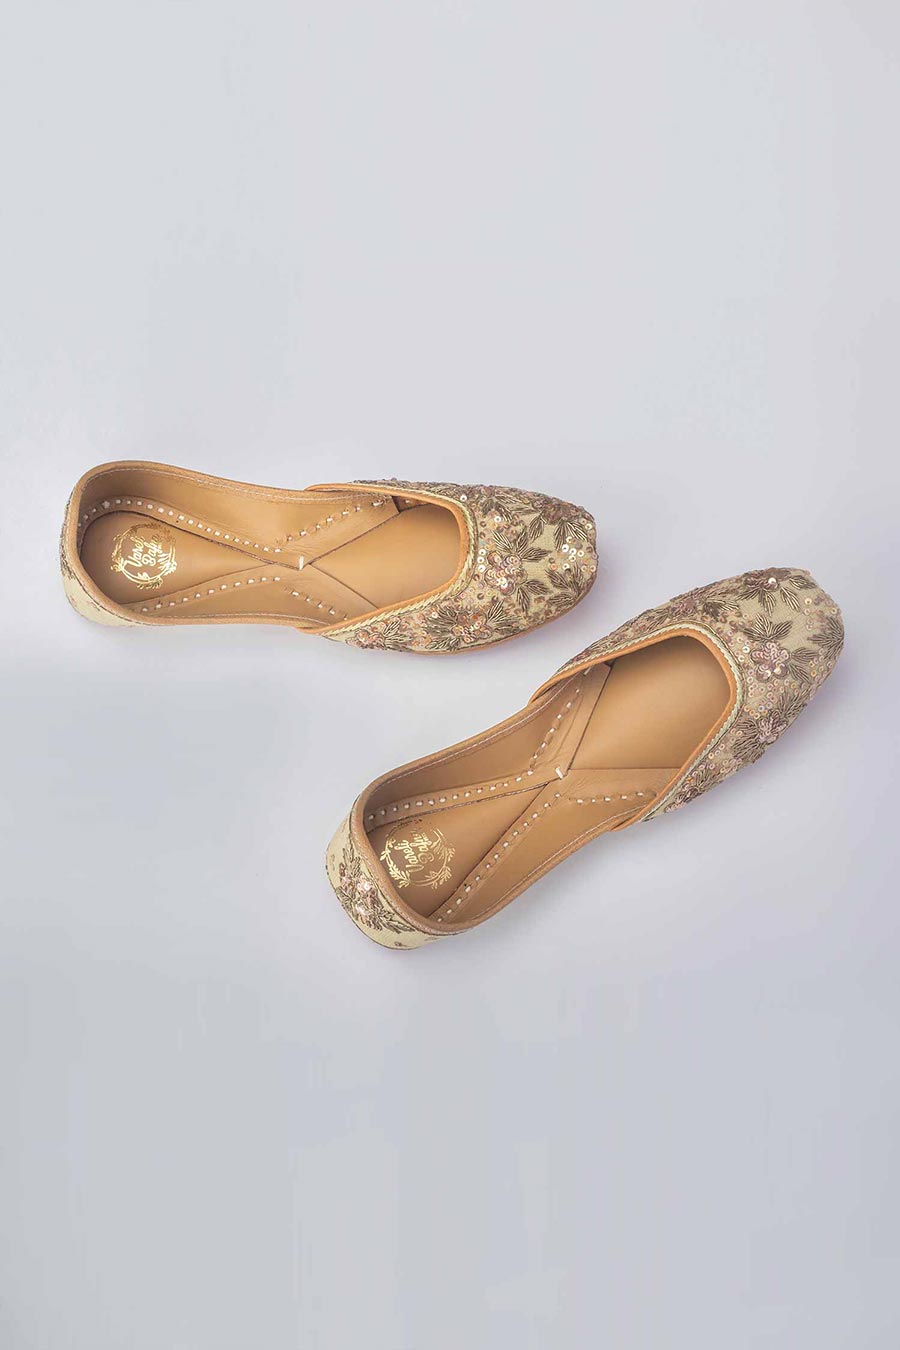 Floral Embroidered Beige Jutti